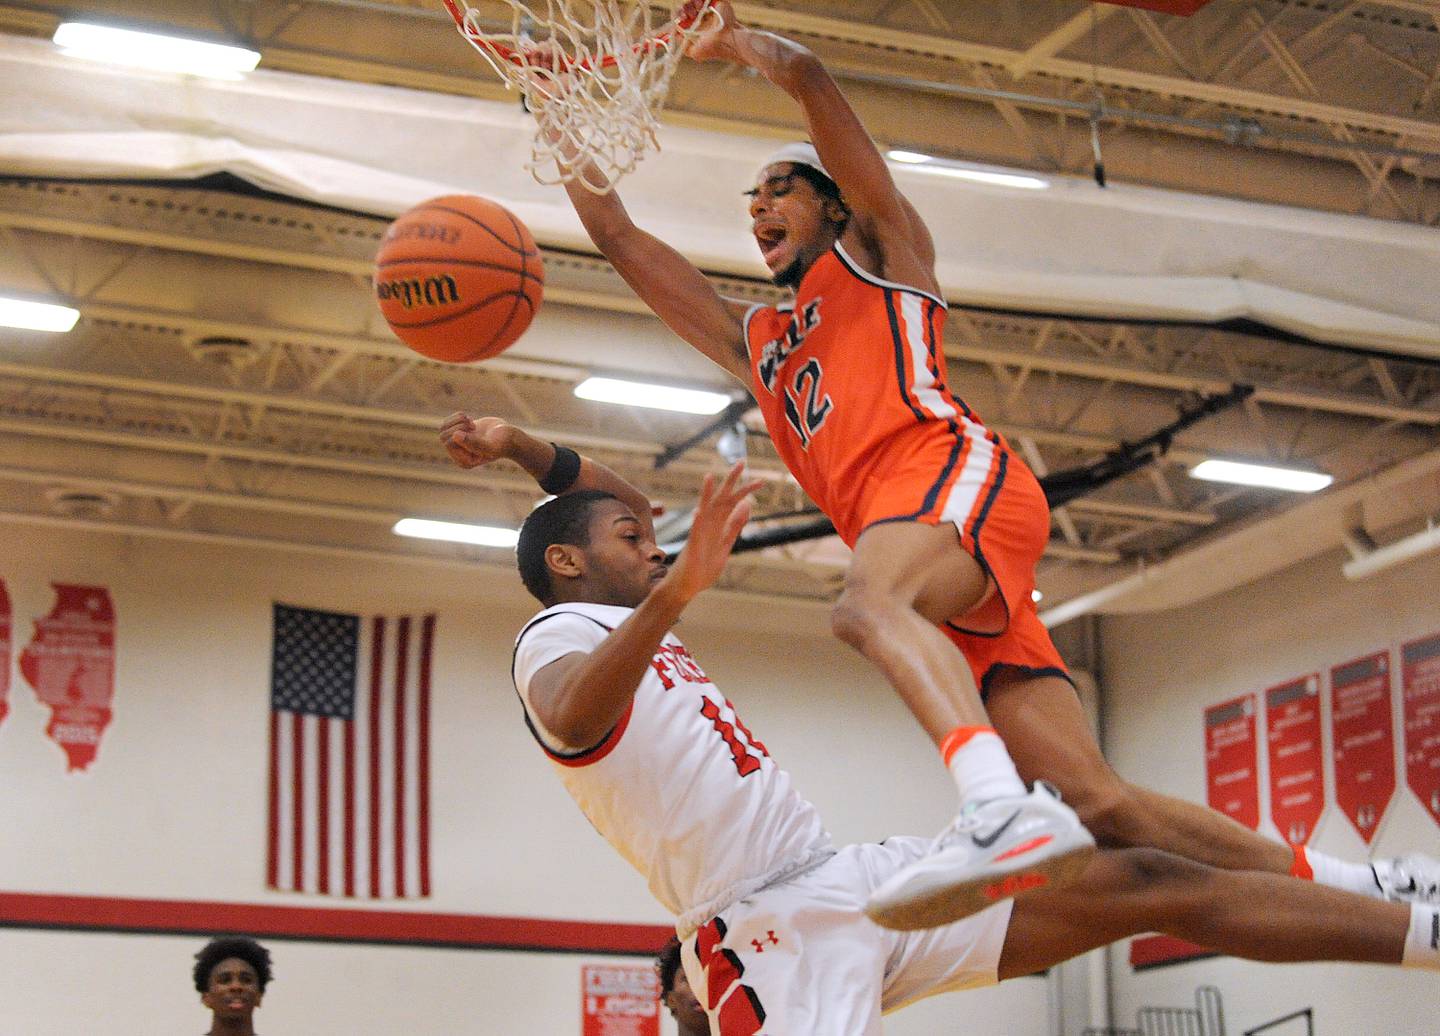 Romeoville's Troy Cicero, Jr (12) slams the ball over Yorkville defender Jovaughn Brown during a boys' basketball game at Yorkville High School on Tuesday, Jan. 10, 2023.